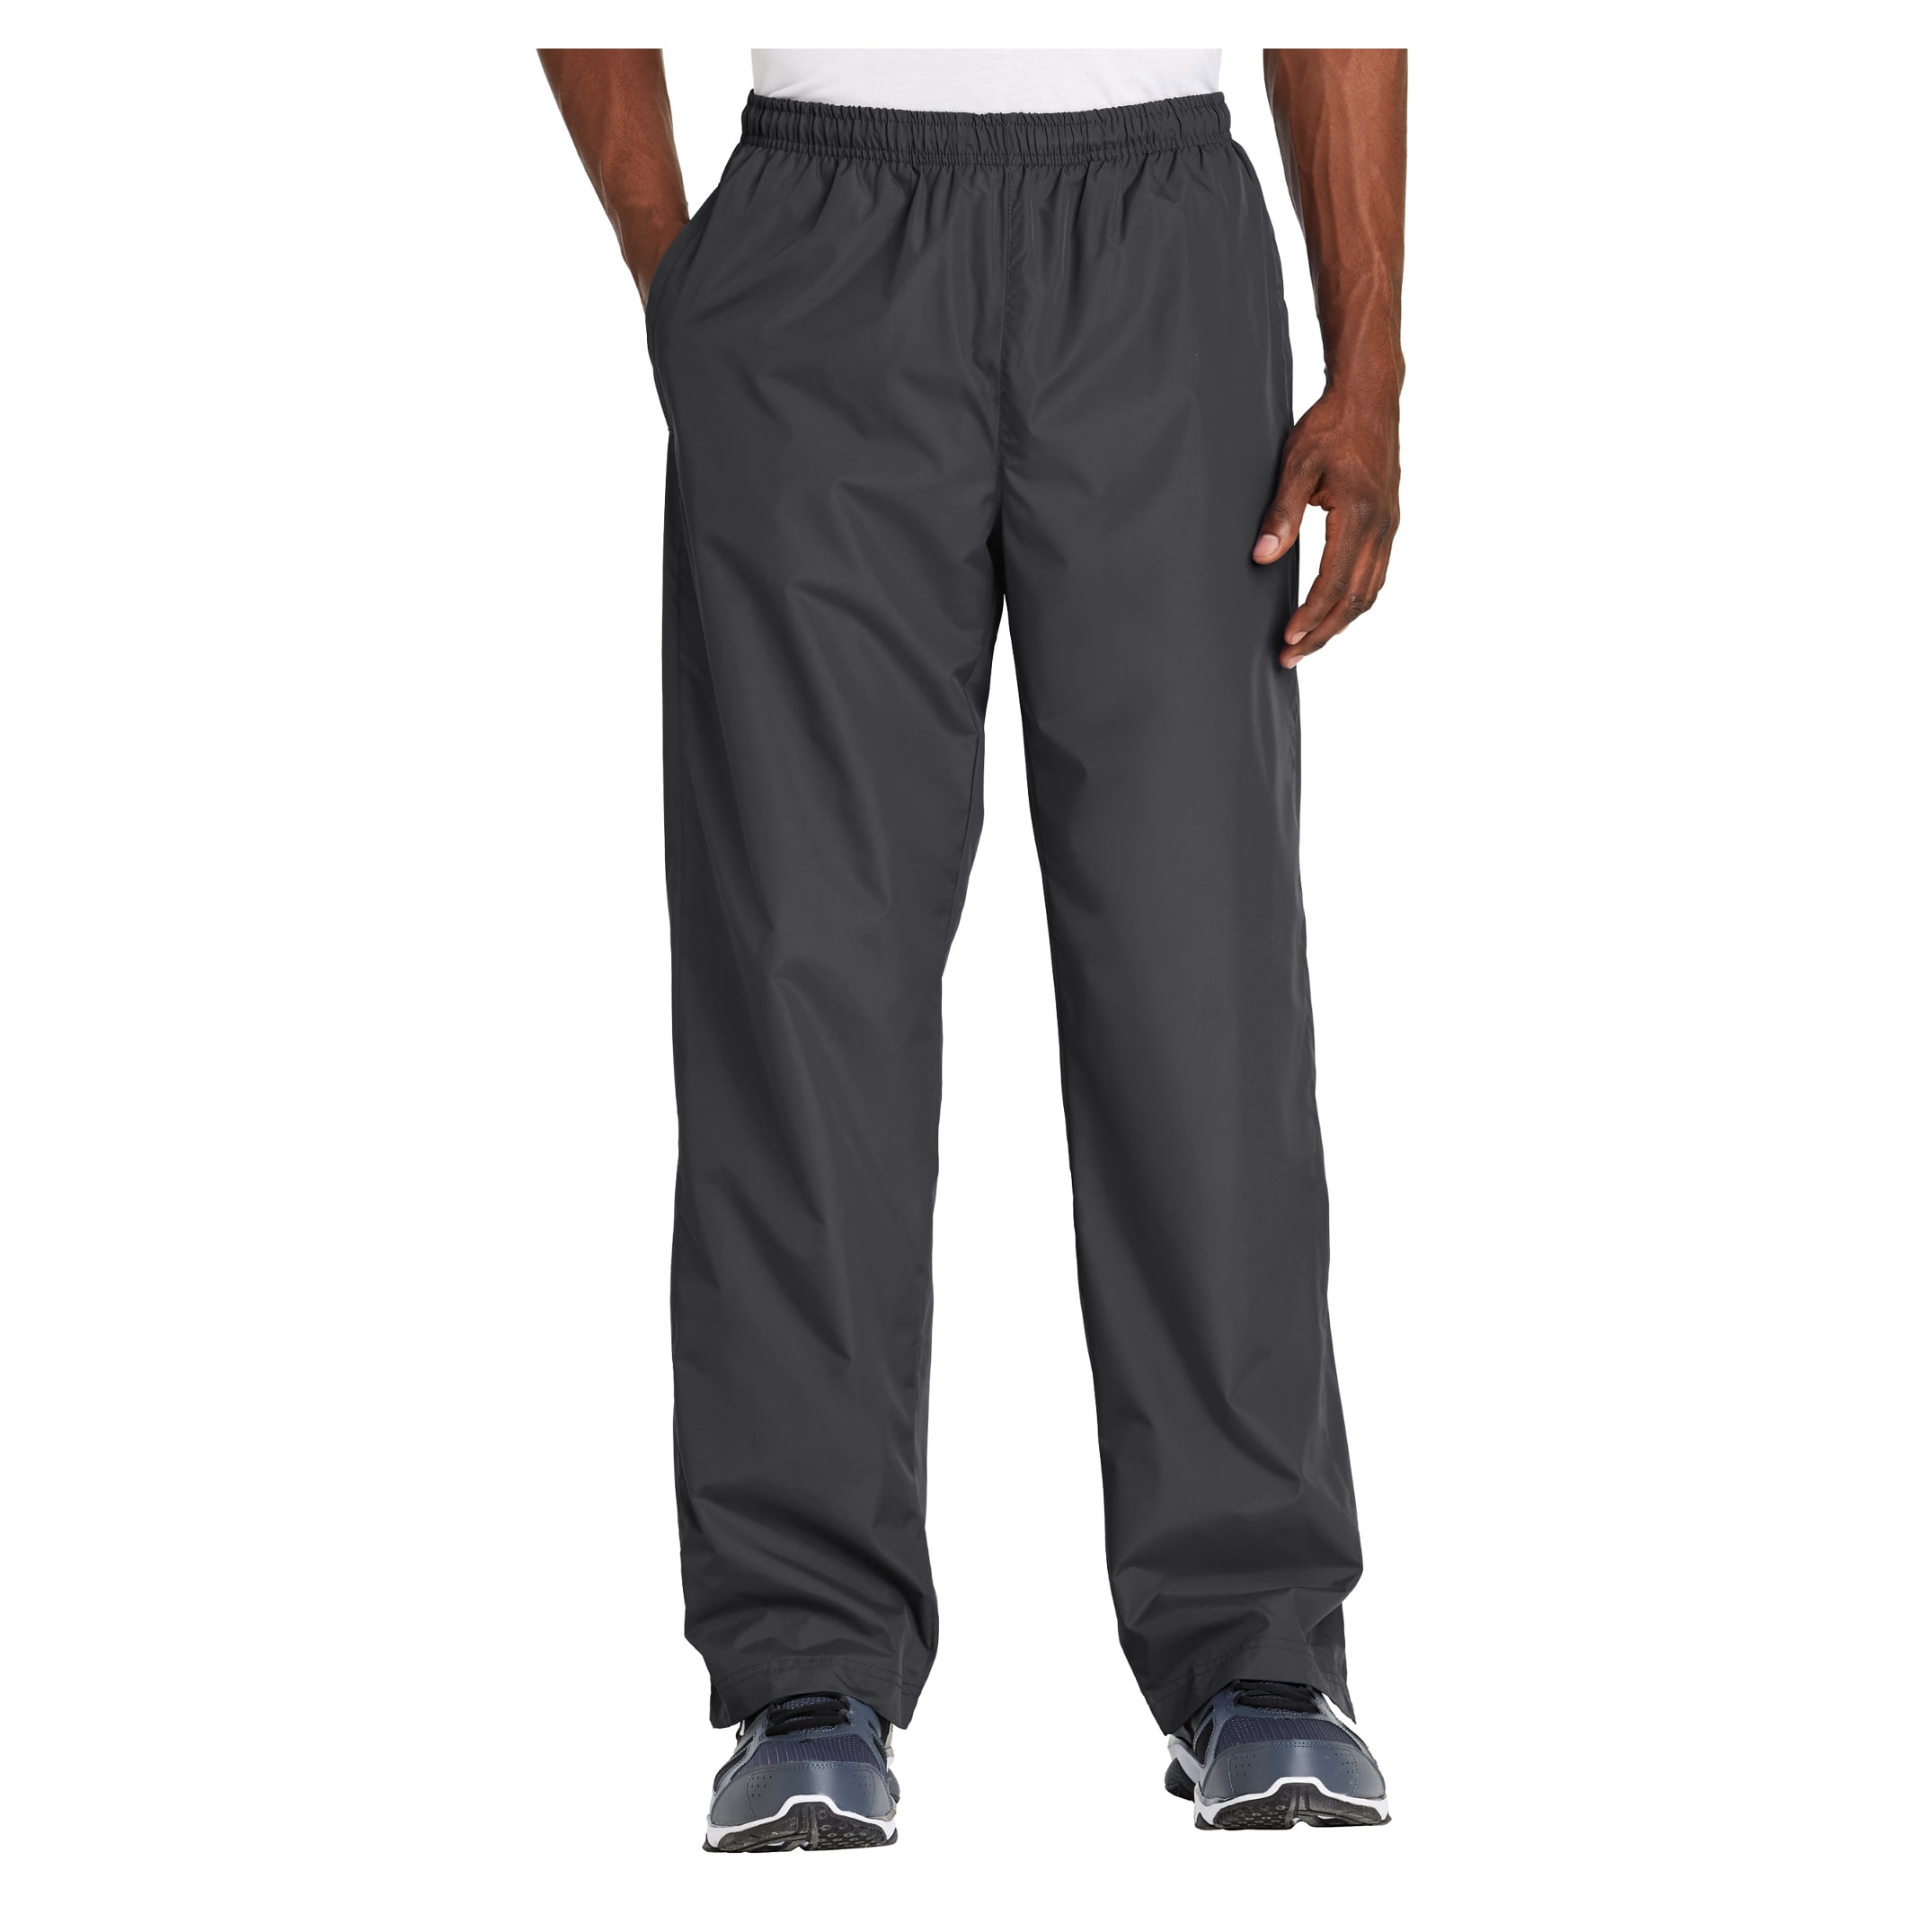 Mafoose Men's Lightweight Hiking Pants Breathable Quick Dry Fit